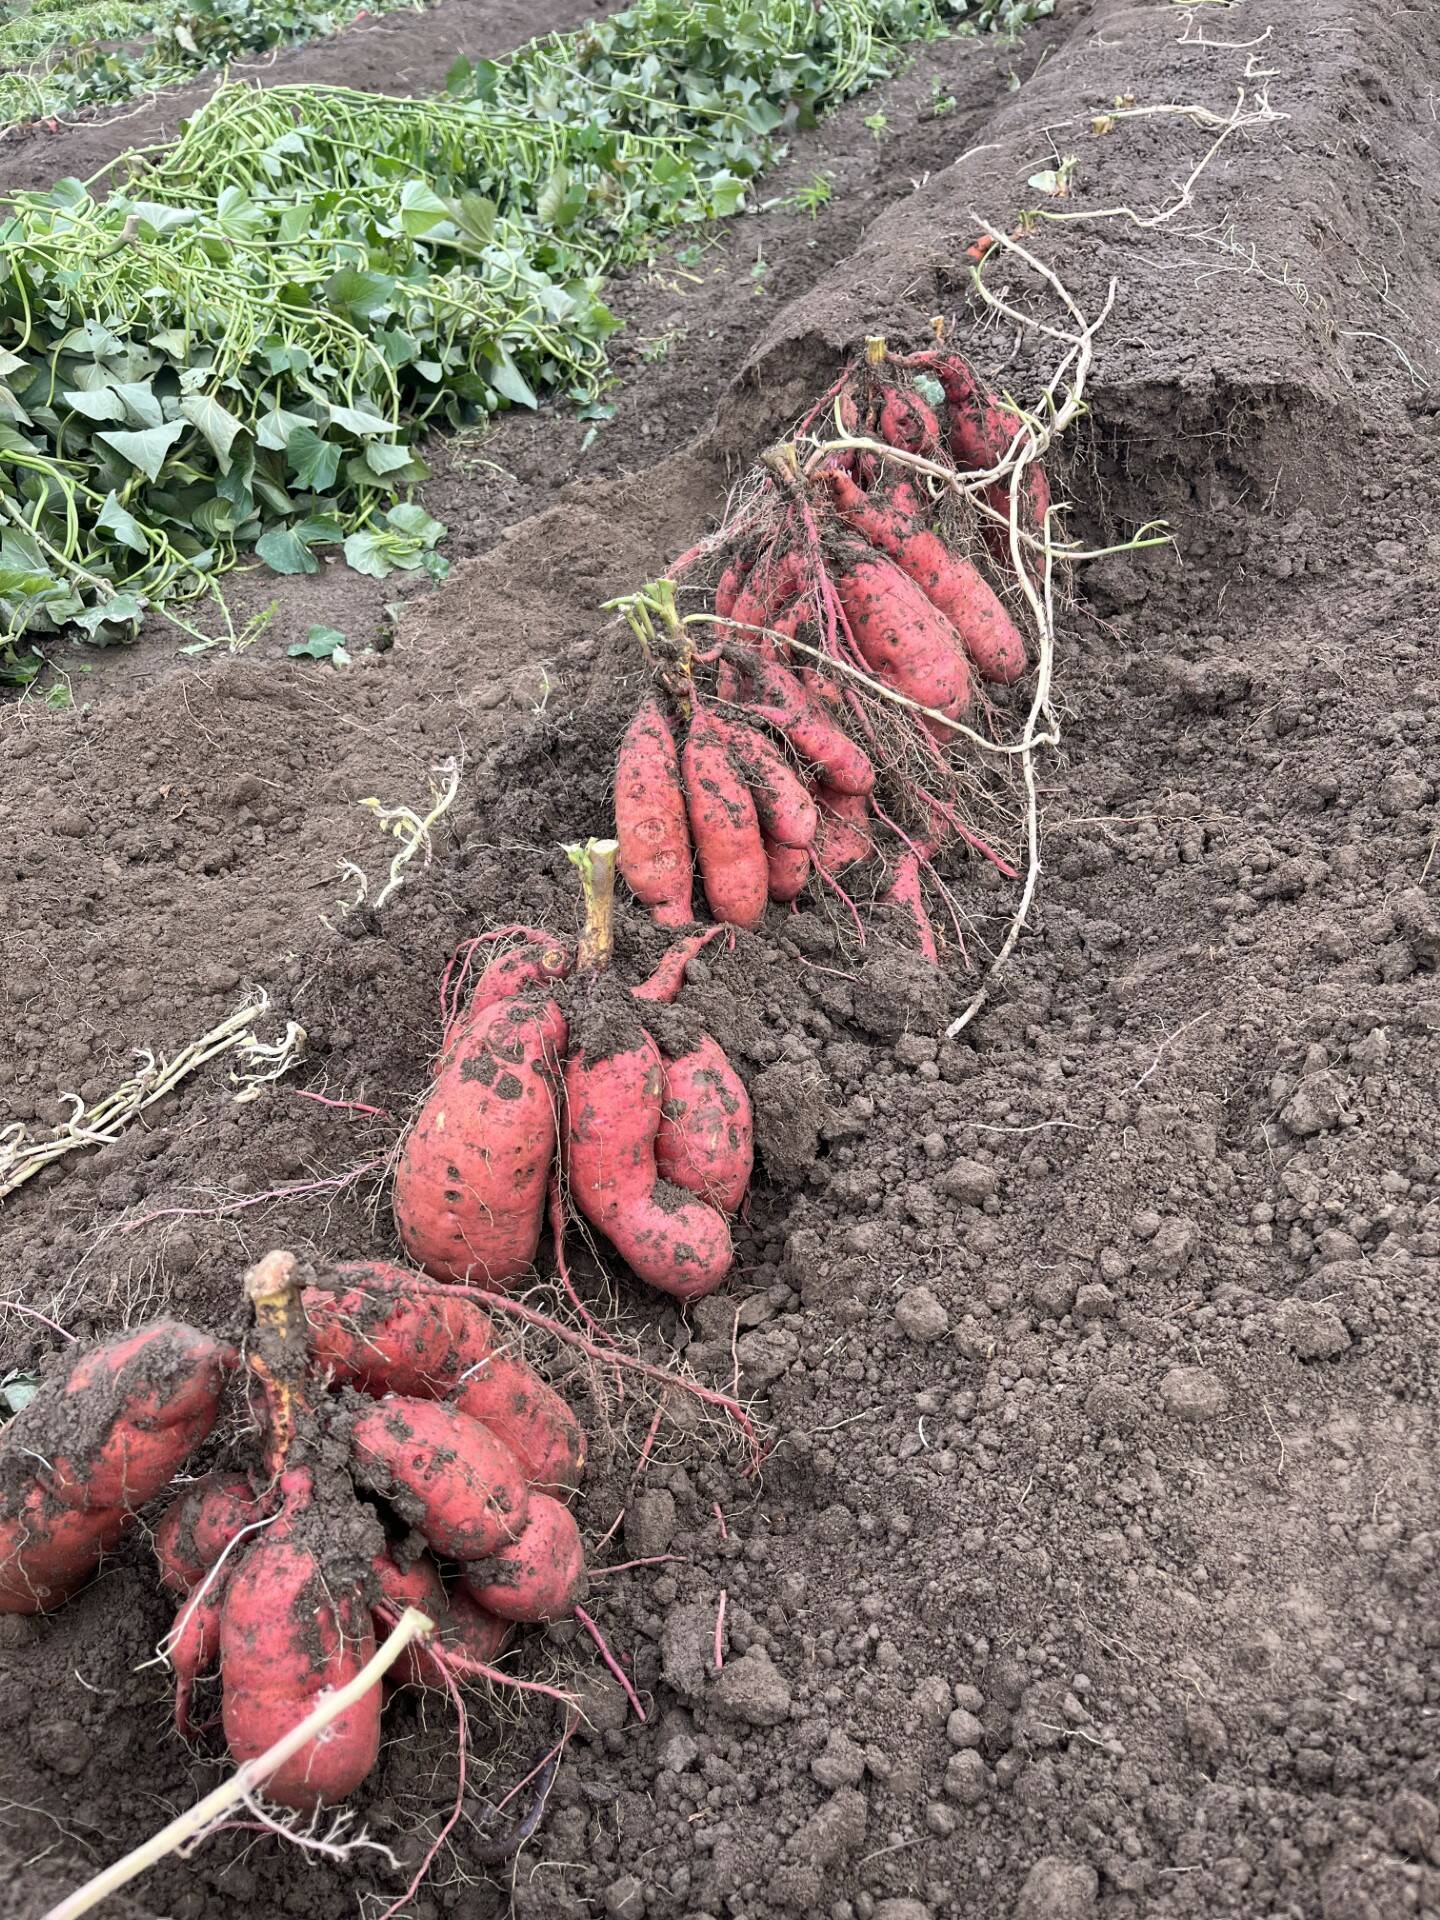 Tired of growing the same old spuds? Find out how you can grow your own sweet potatoes—like this Georgia Jet variety—west of the Cascades! Join WSU Clallam County Extension Regional Horticulture Specialist Laurel Moulton for the Green Thumb Education Series presentation “Growing Sweet Potatoes,” Thursday, December 14th, 12-1 at the Port Angeles Library. (Photo by Laurel Moulton)